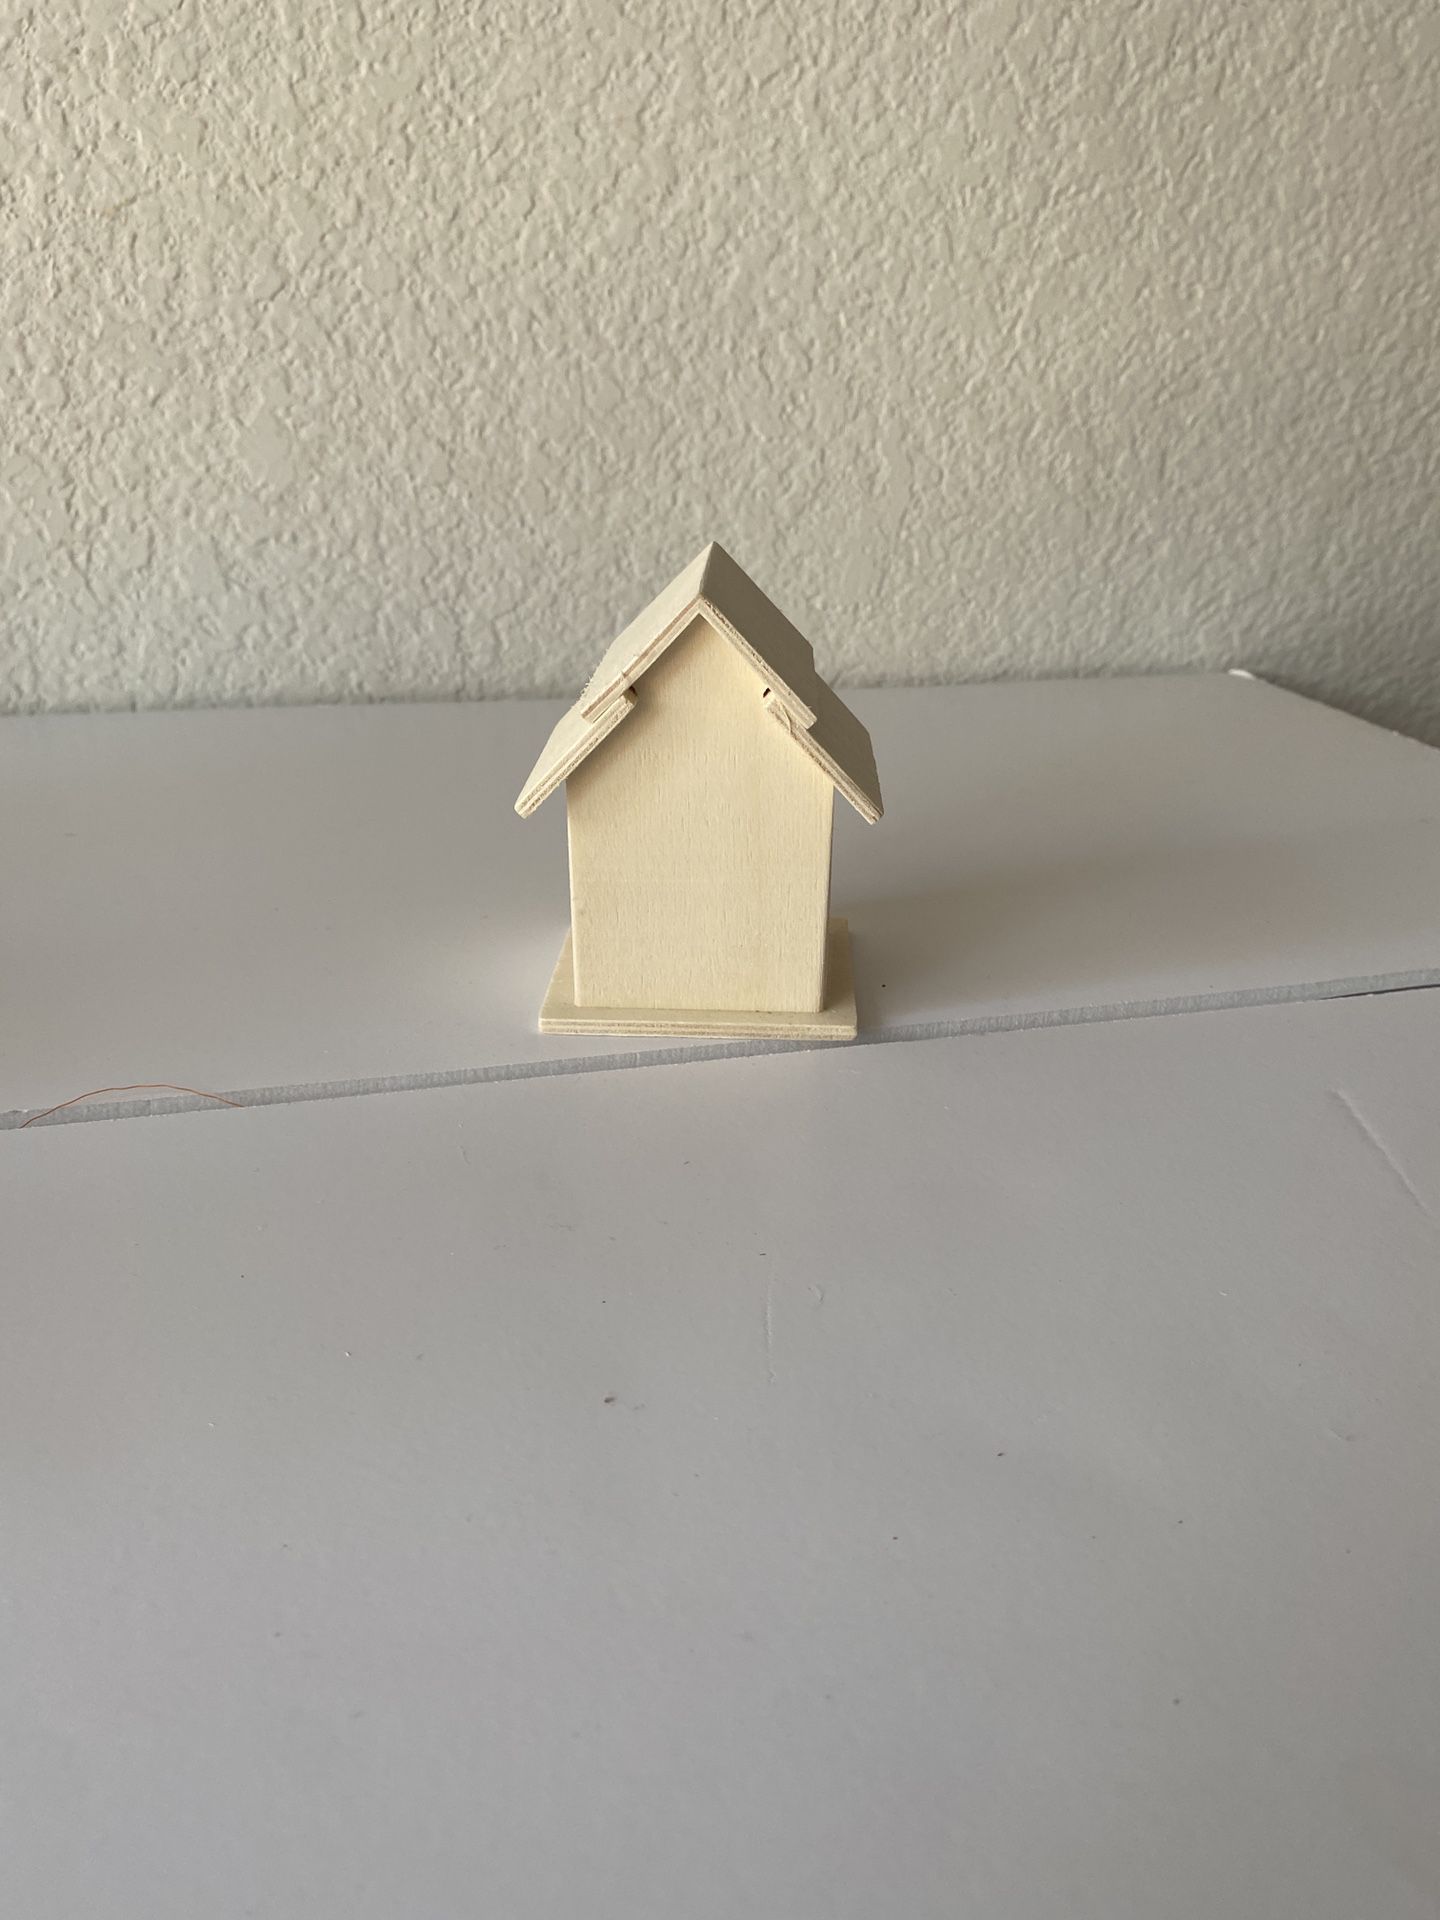 Bird Houses and Crafts Supplies